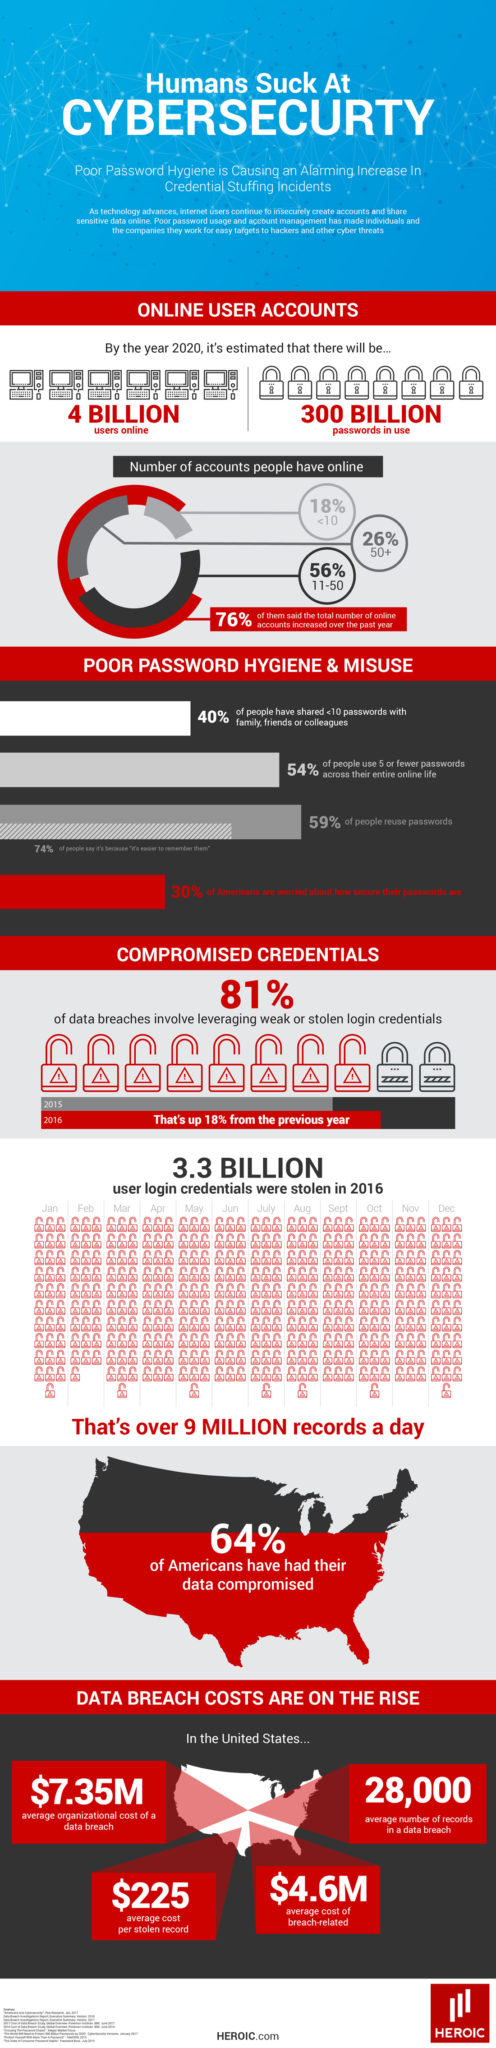 humans-suck-at-cybersecurity-infographic-web.jpg